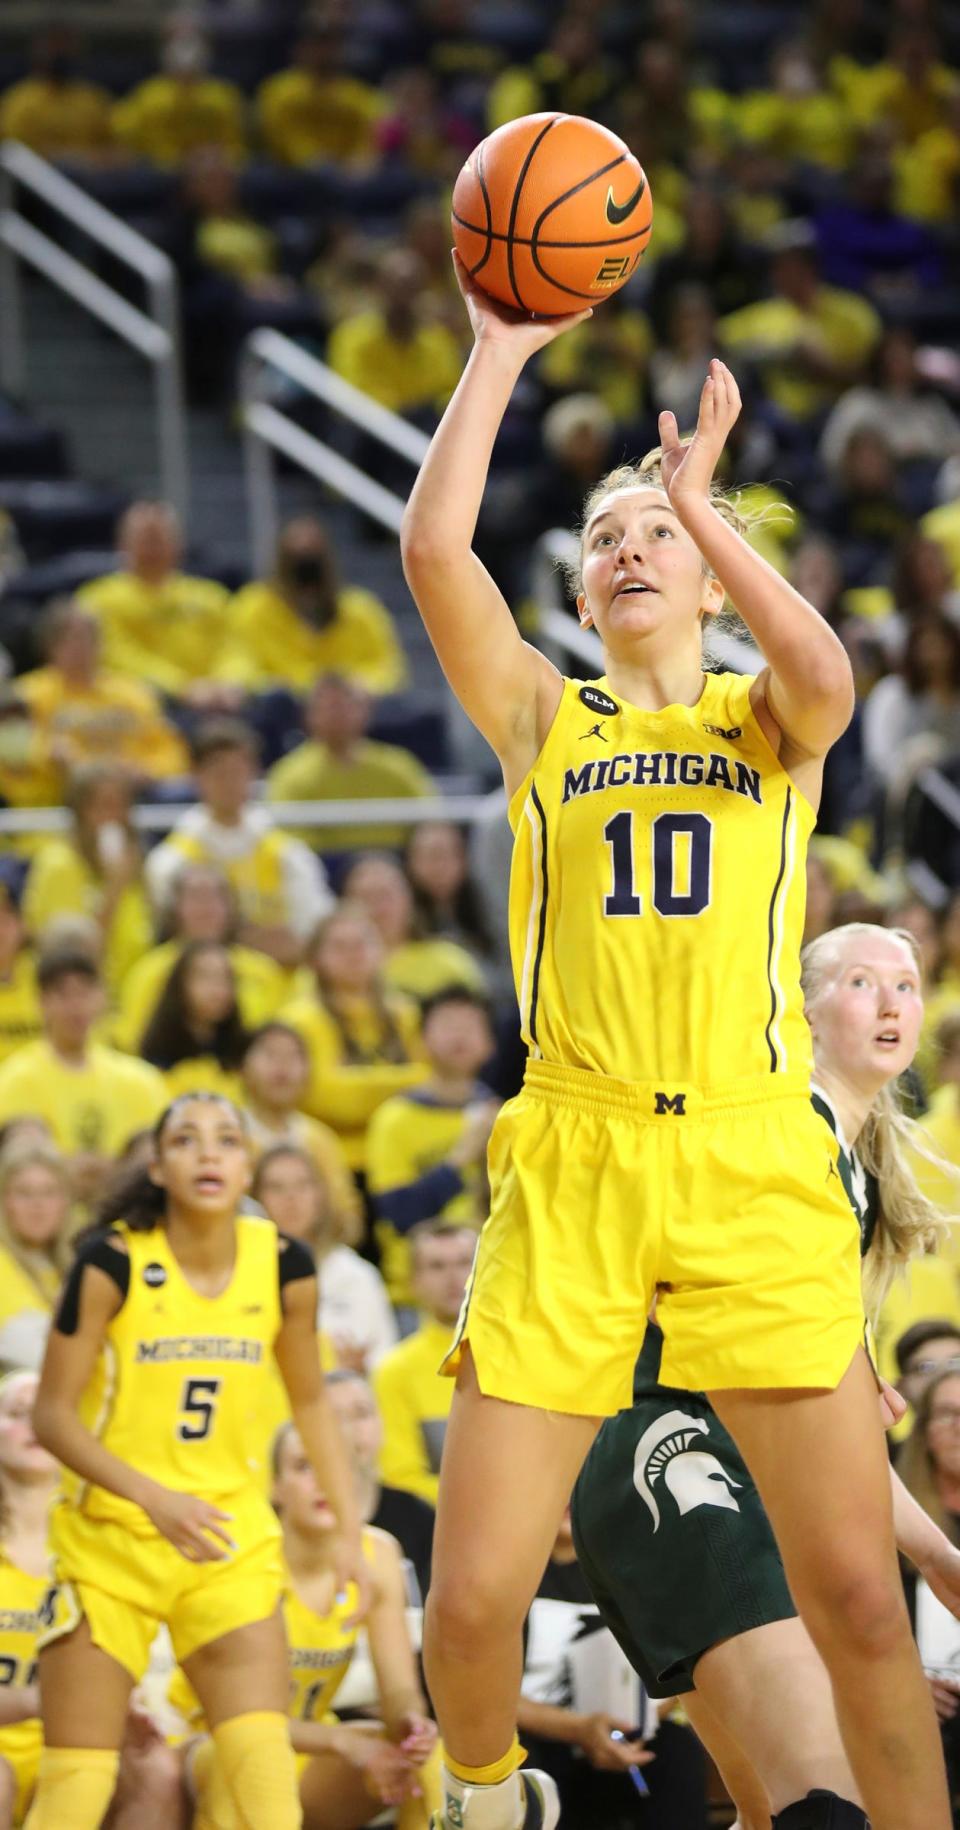 Michigan Wolverines guard Jordan Hobbs (10) scores against the Michigan State Spartans during fourth-quarter action at Crisler Center in Ann Arbor on Saturday, Jan. 14, 2023.